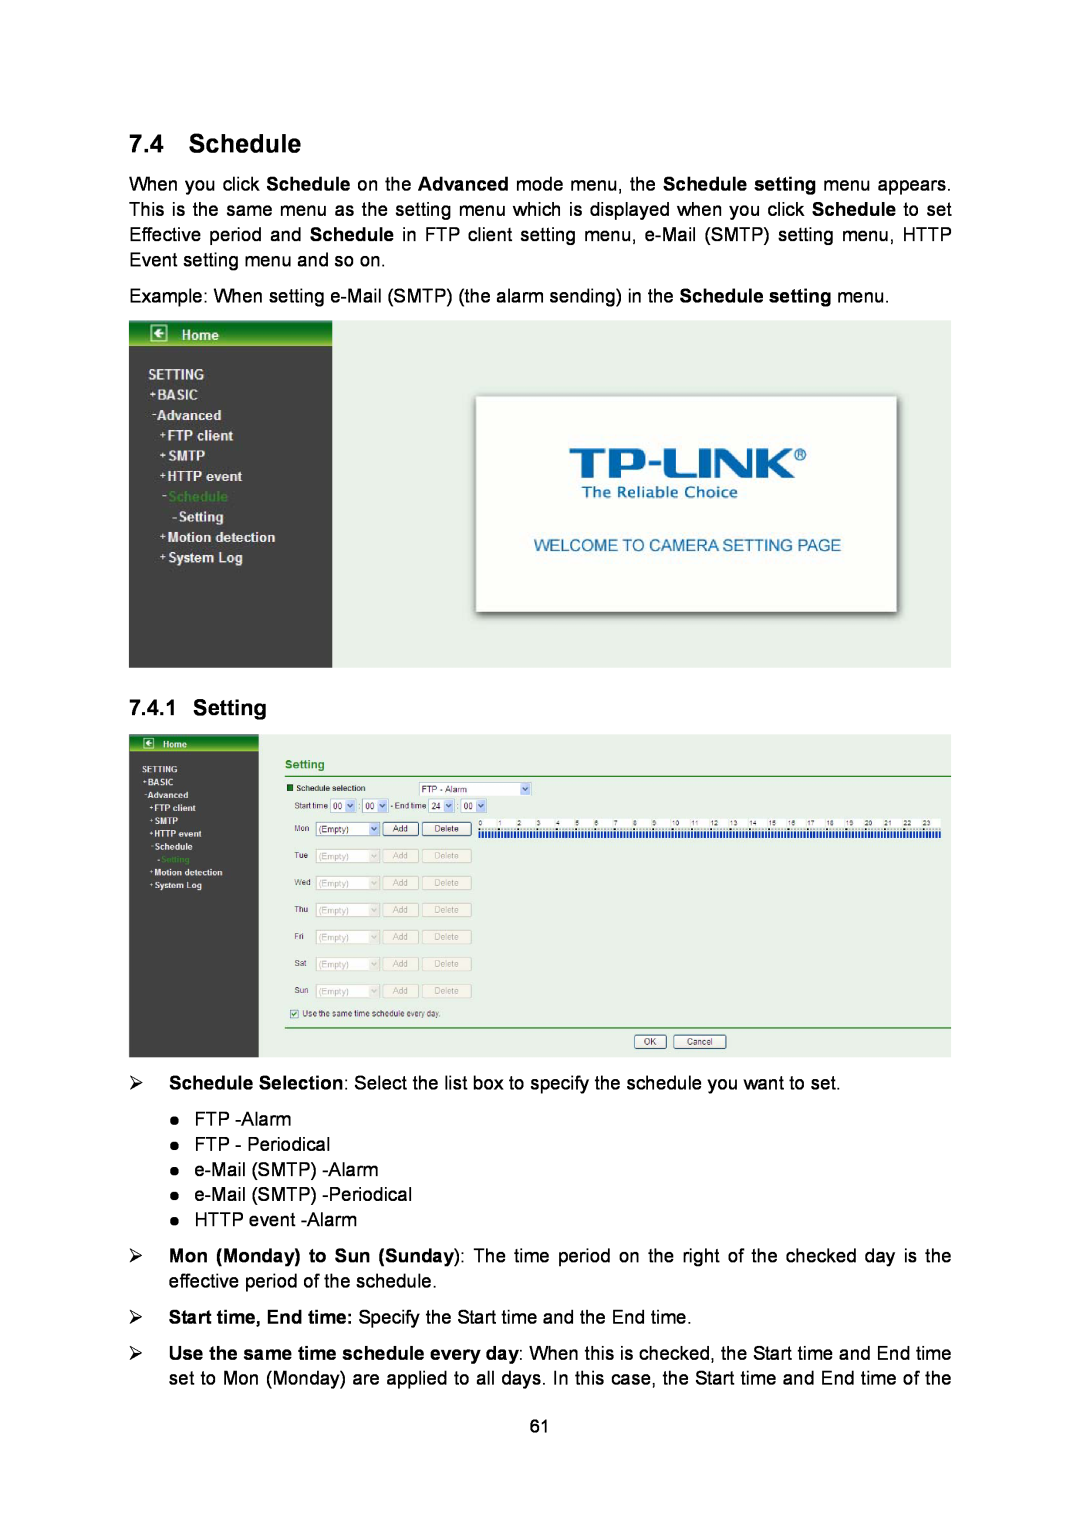 TP-Link TL-SC3130G manual Schedule, Setting 